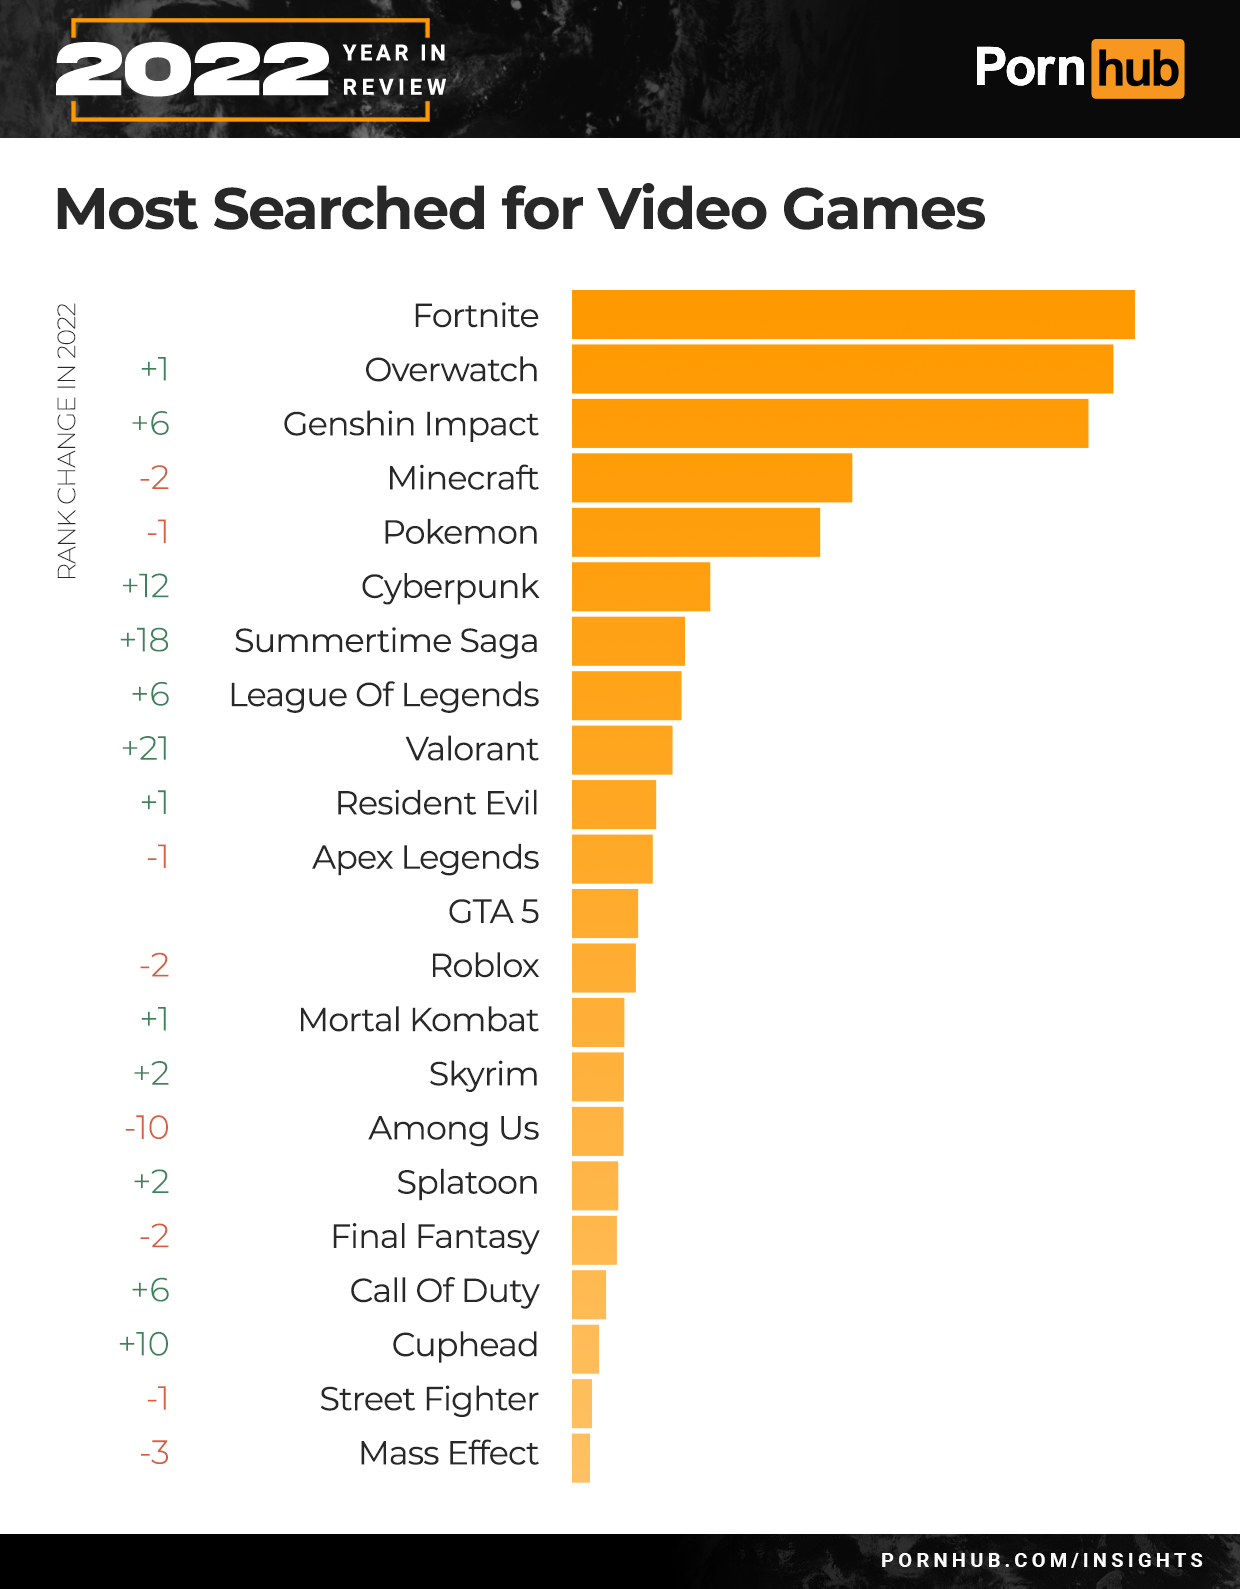 pornhub year in review 2022 - most searched characters on the hub - Year In 2022 Review Most Searched for Video Games Rank Change In 2022 6 2 6 2 1 12 18 6 21 1 F 2 2 10 2 2 6 10 1 3 Fortnite Overwatch Genshin Impact Minecraft Pokemon Cyberpunk Porn hub S